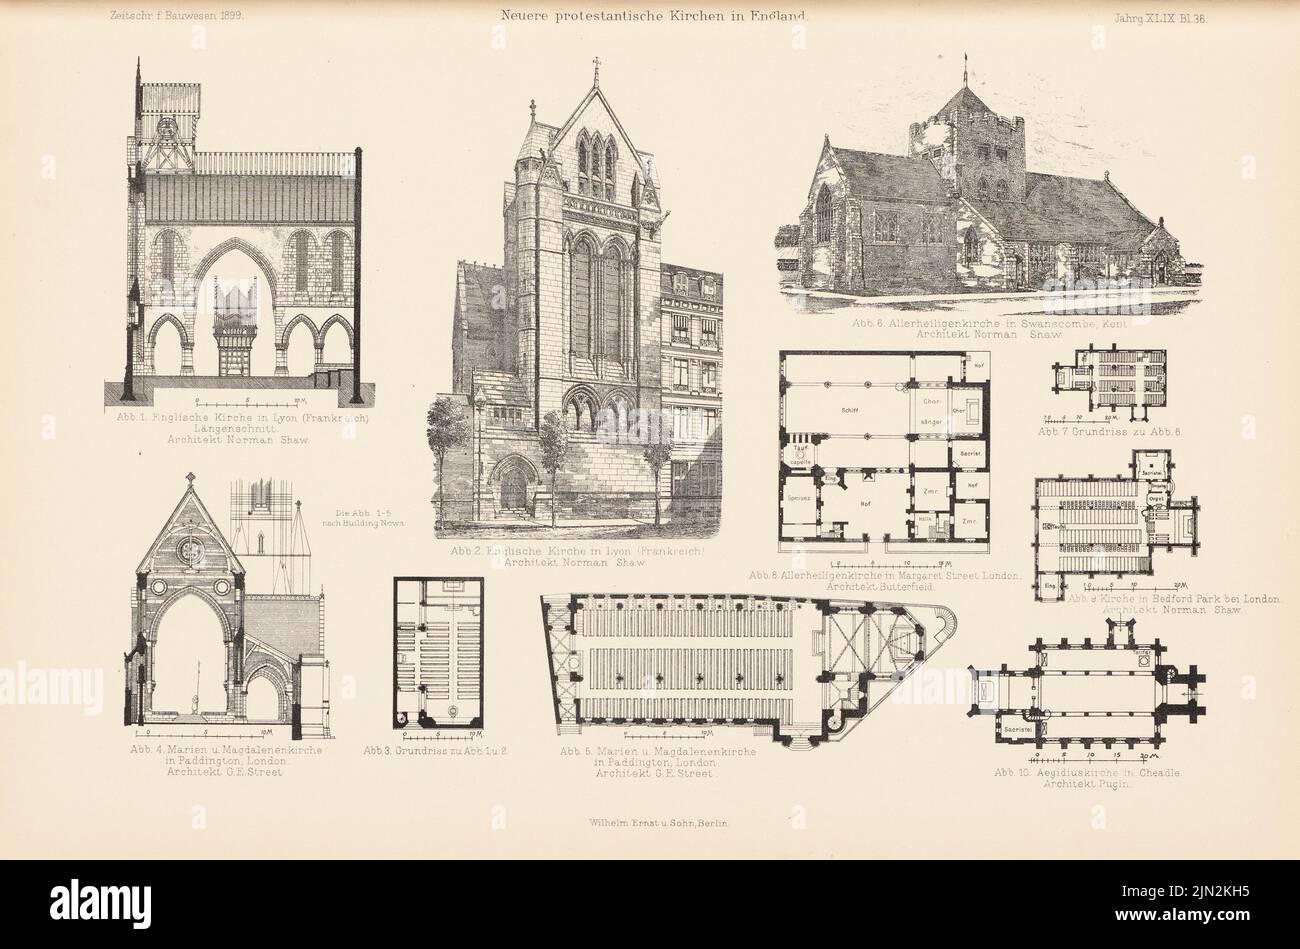 Shaw Norman (1831-1912), newer Protestant churches in England. (From: Atlas to the magazine for Building, ed. V. Ministry of public work, born 49, 1899): Views, floor plan, cuts of the churches in Lyon, London, SwansCompbe, Bedford Park and Cheadle. Stitch on paper, 28.4 x 42.9 cm (including scan edges) Stock Photo